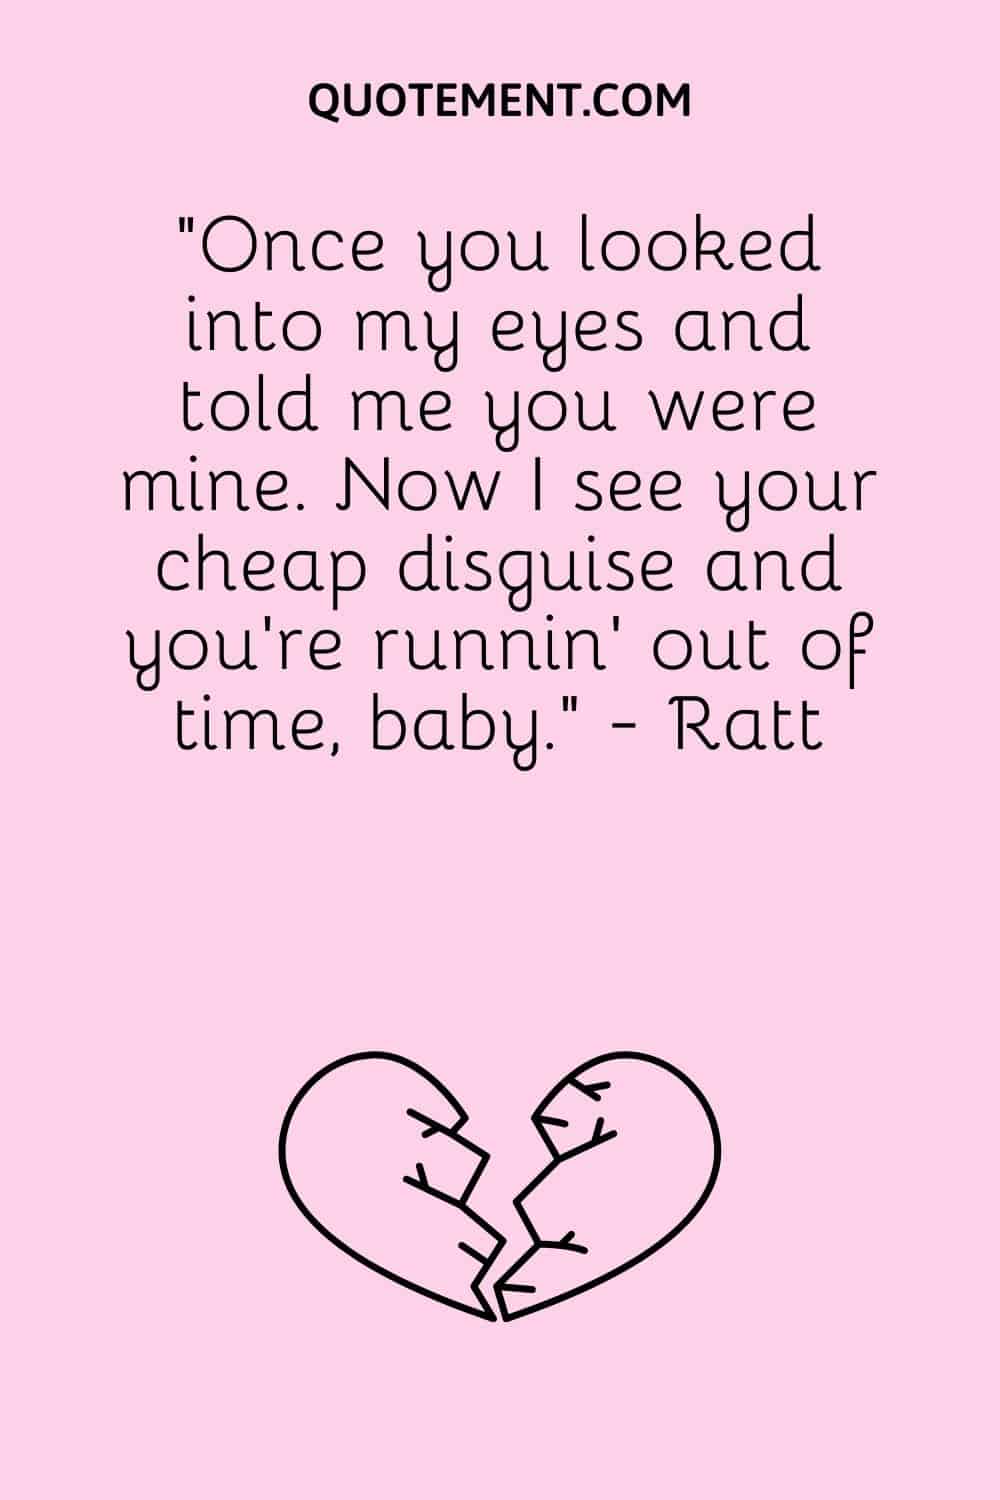 “Once you looked into my eyes and told me you were mine. Now I see your cheap disguise and you're runnin' out of time, baby.” - Ratt